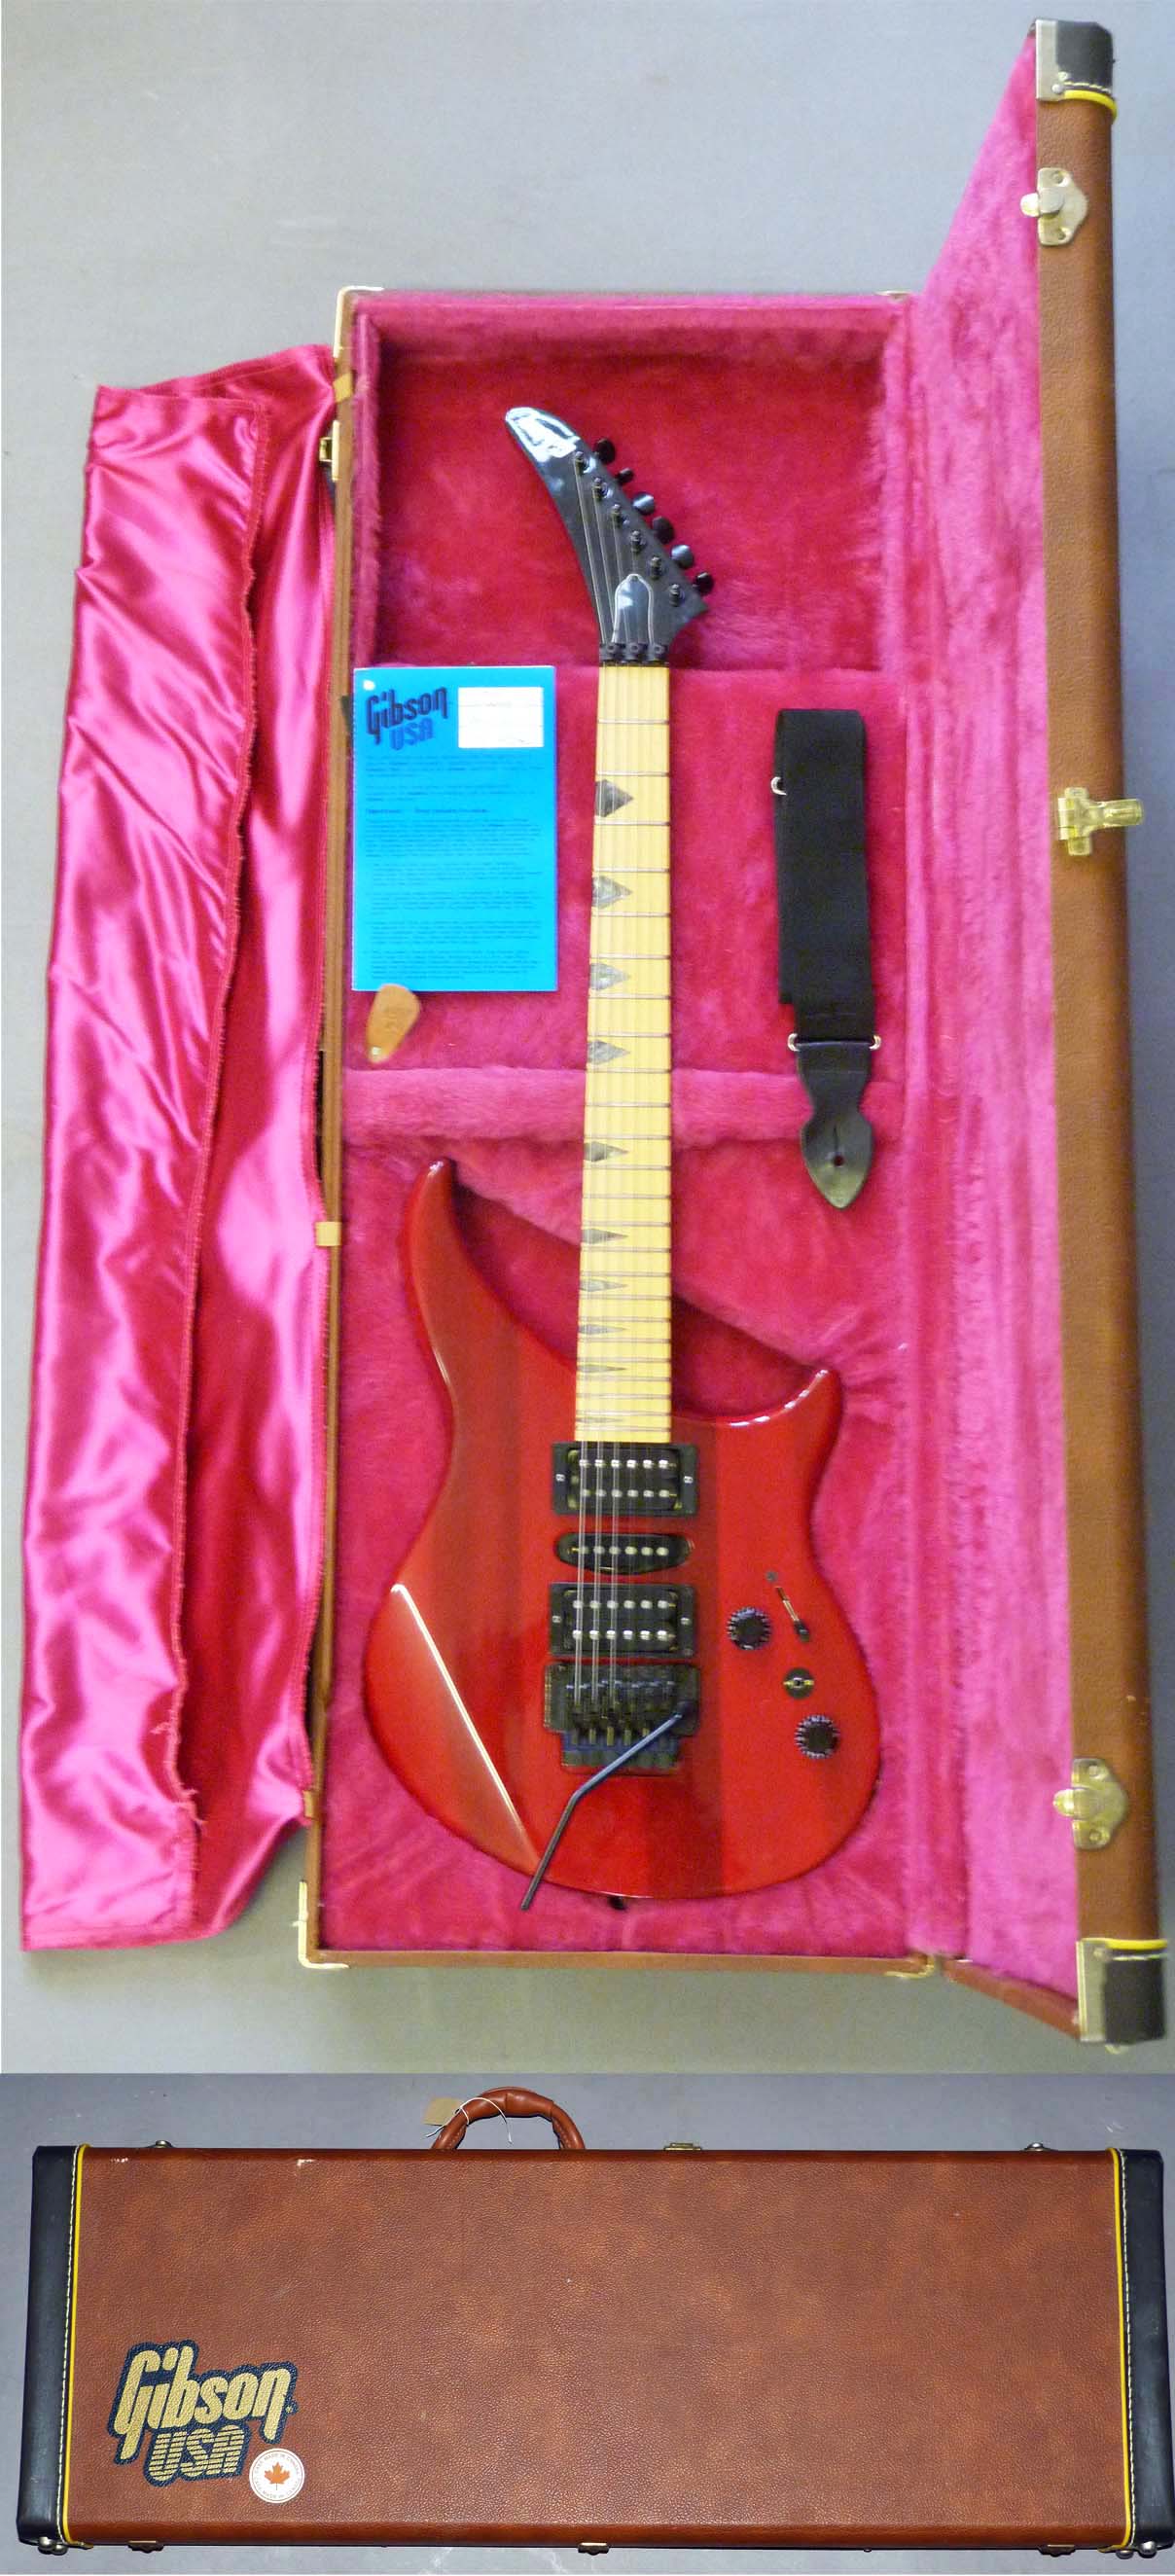 A Gibson M3 Standard RD Electric Guitar Serial No.94018826 with Gibson Case. Made at the Nashville